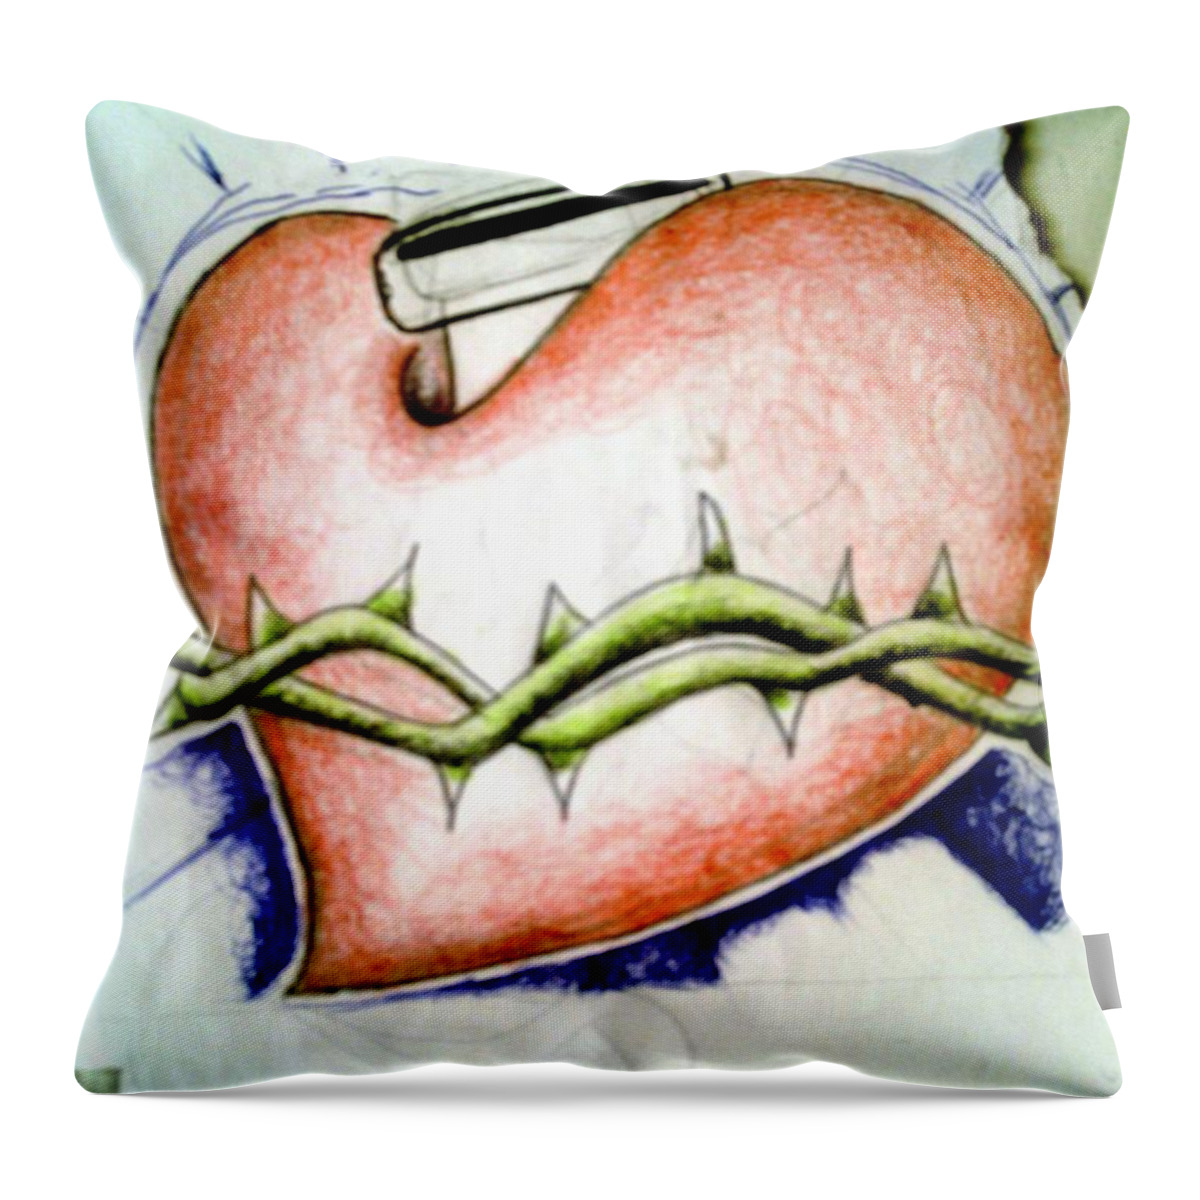 Black Art Throw Pillow featuring the drawing Untitled 6 by A S 